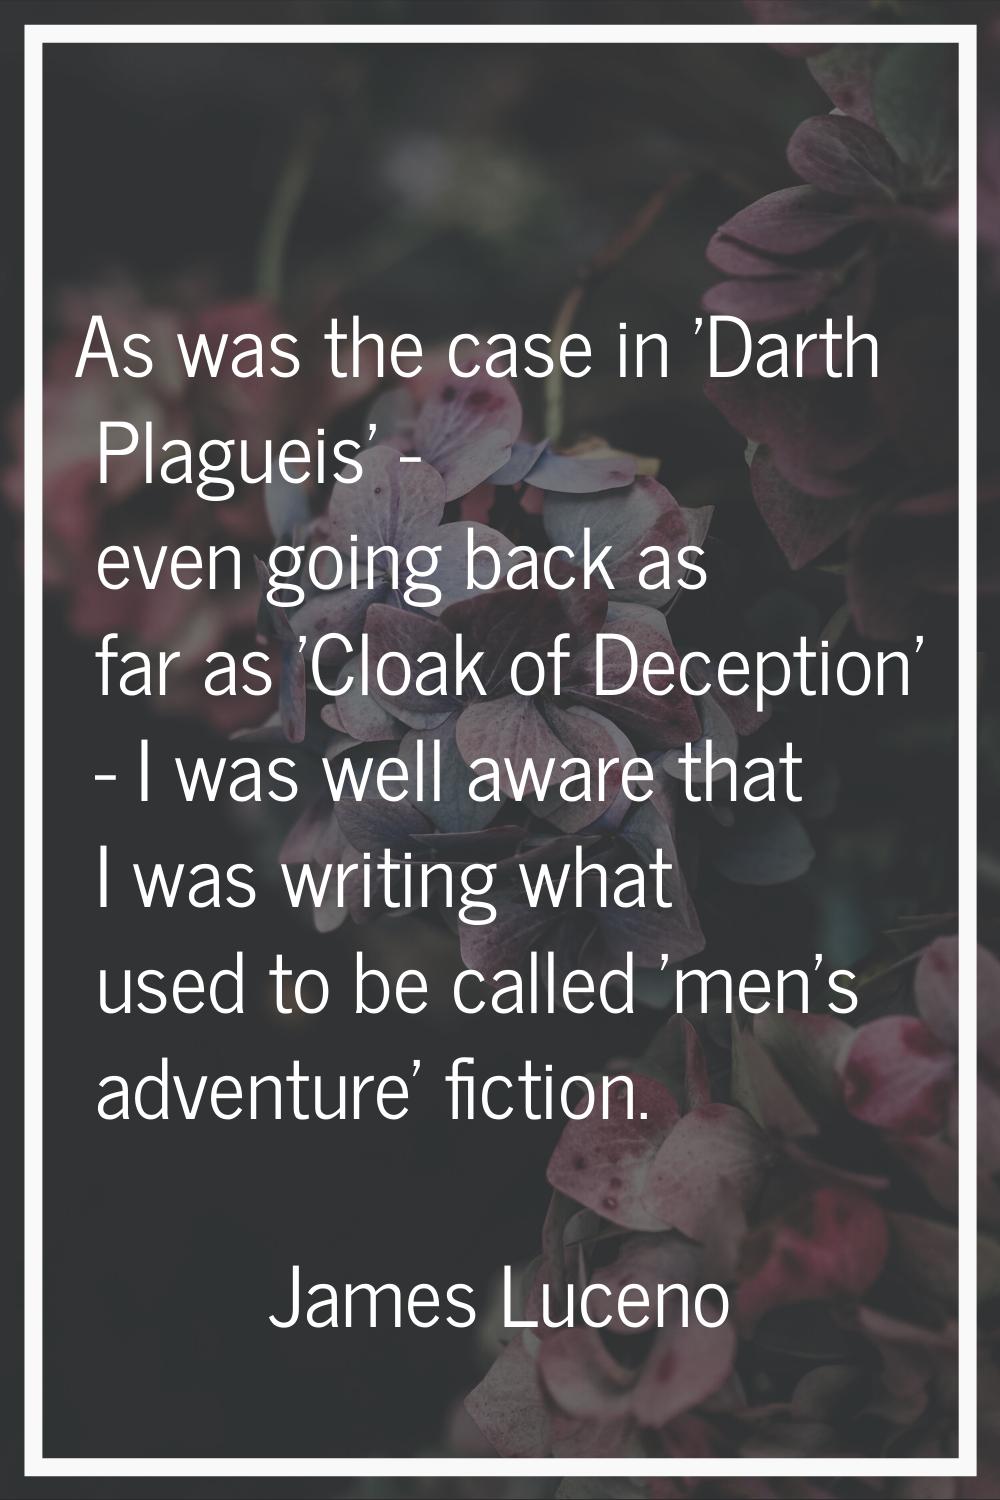 As was the case in 'Darth Plagueis' - even going back as far as 'Cloak of Deception' - I was well a